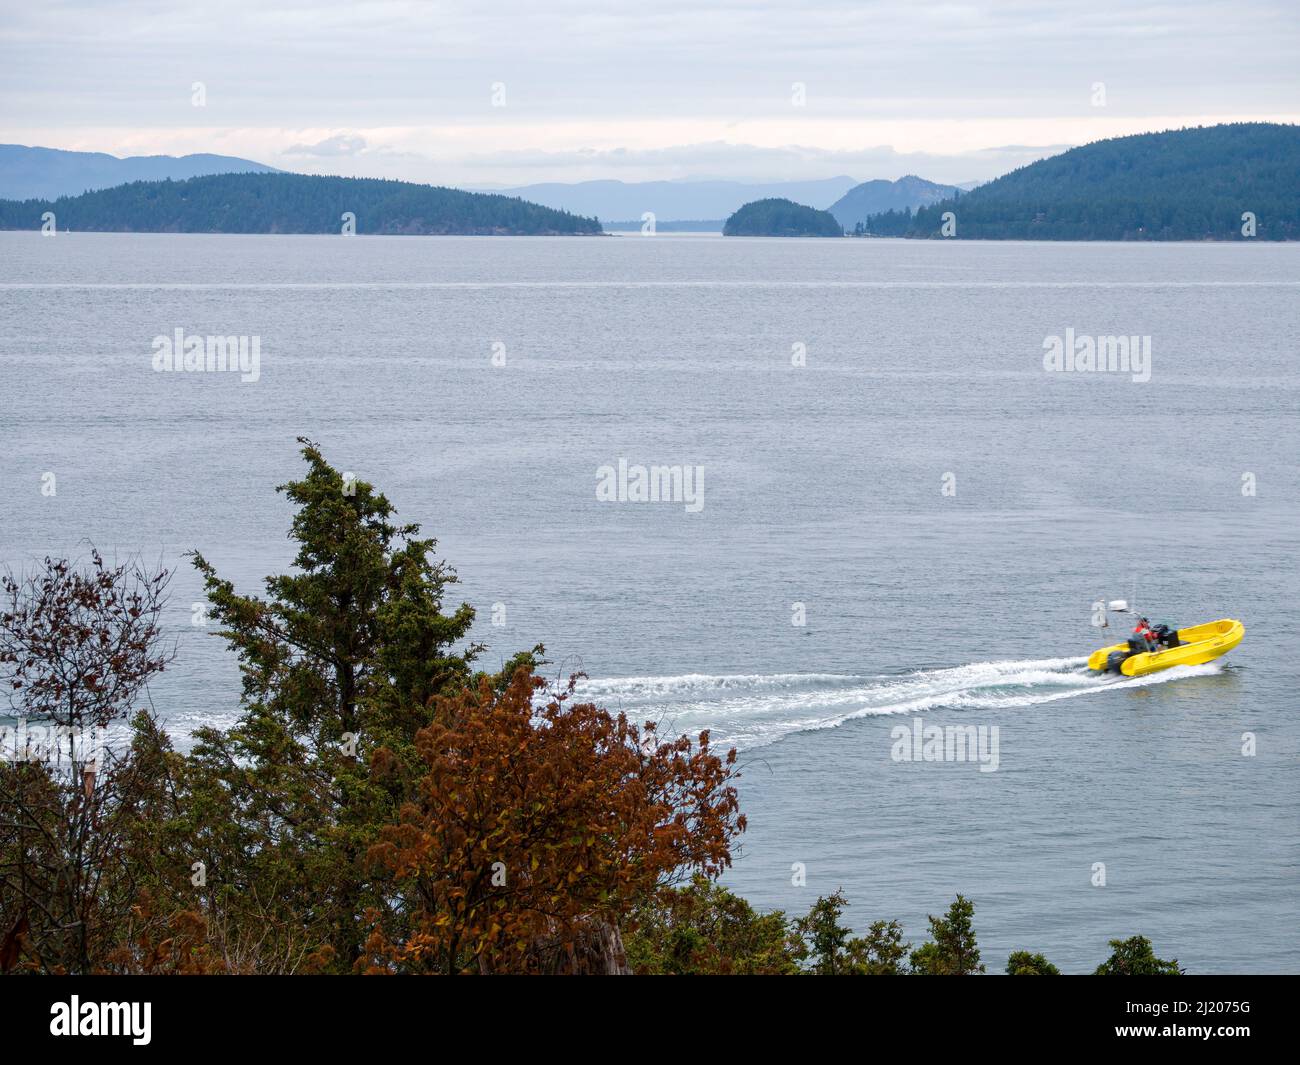 WA21204-00...WASHINGTON - Orcas Island viewed from Upright Head Preserve on the northern end of Lopez Island. Stock Photo